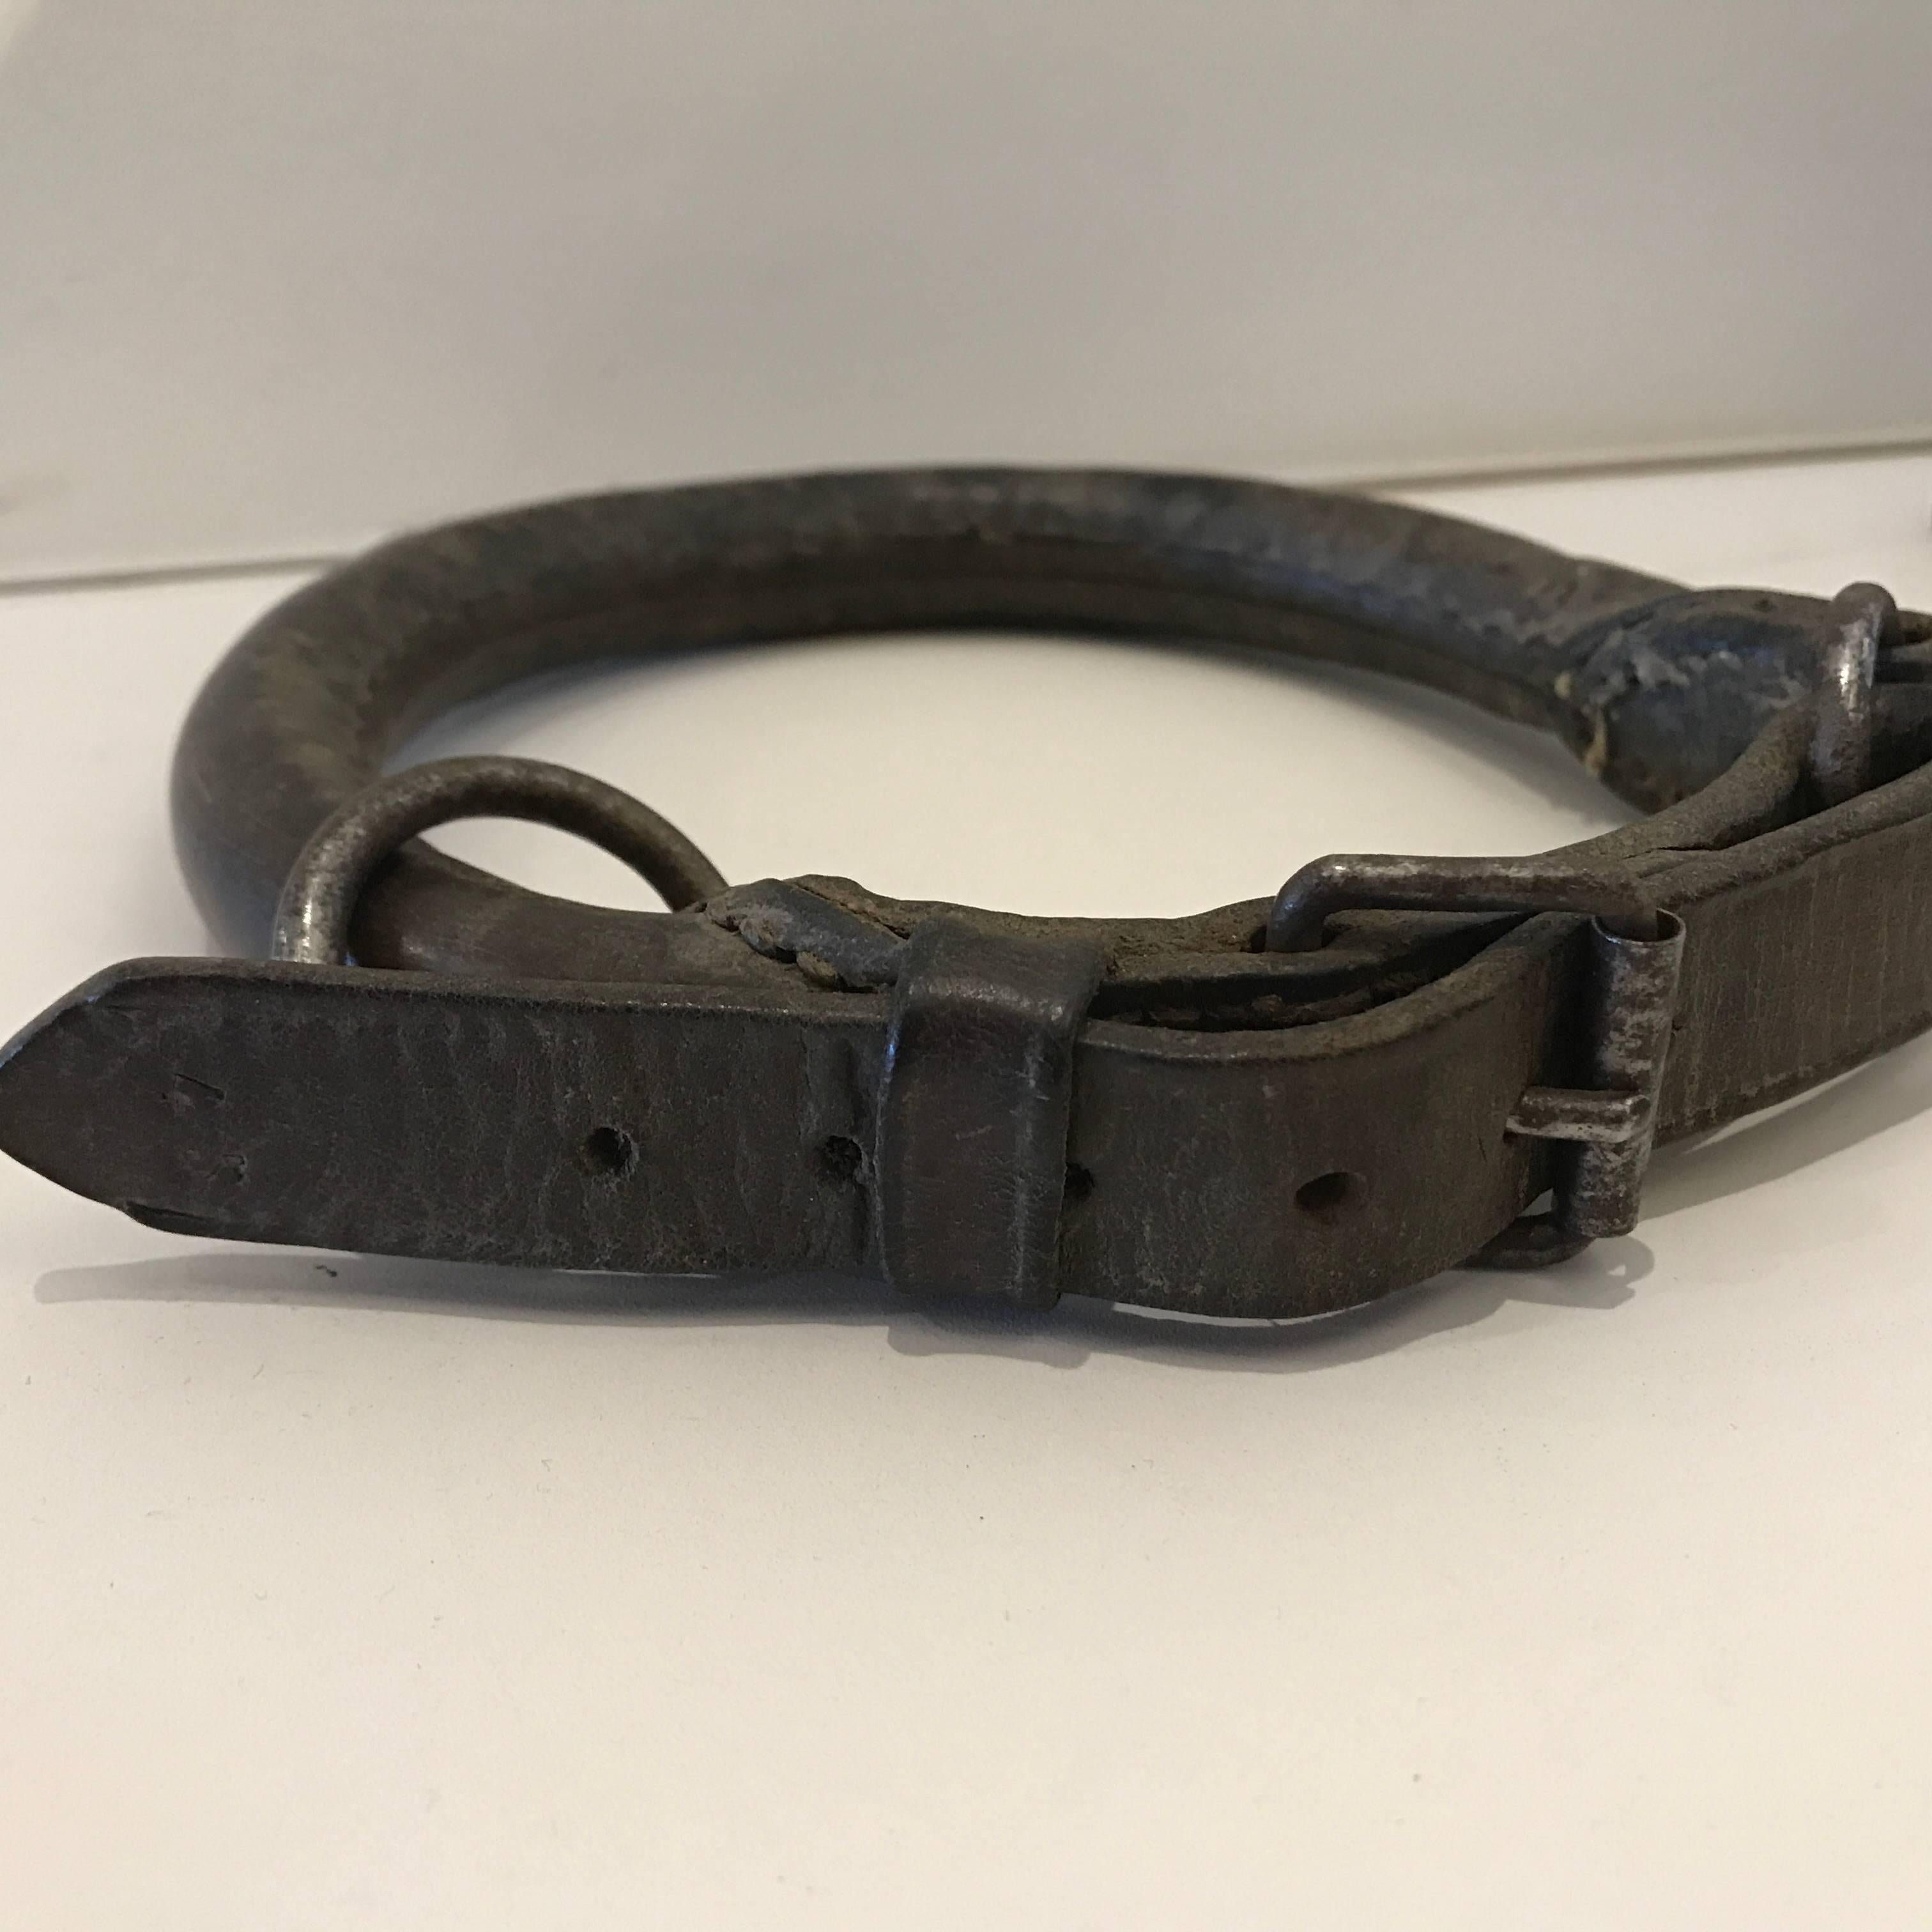 19th century French leather dog collar.